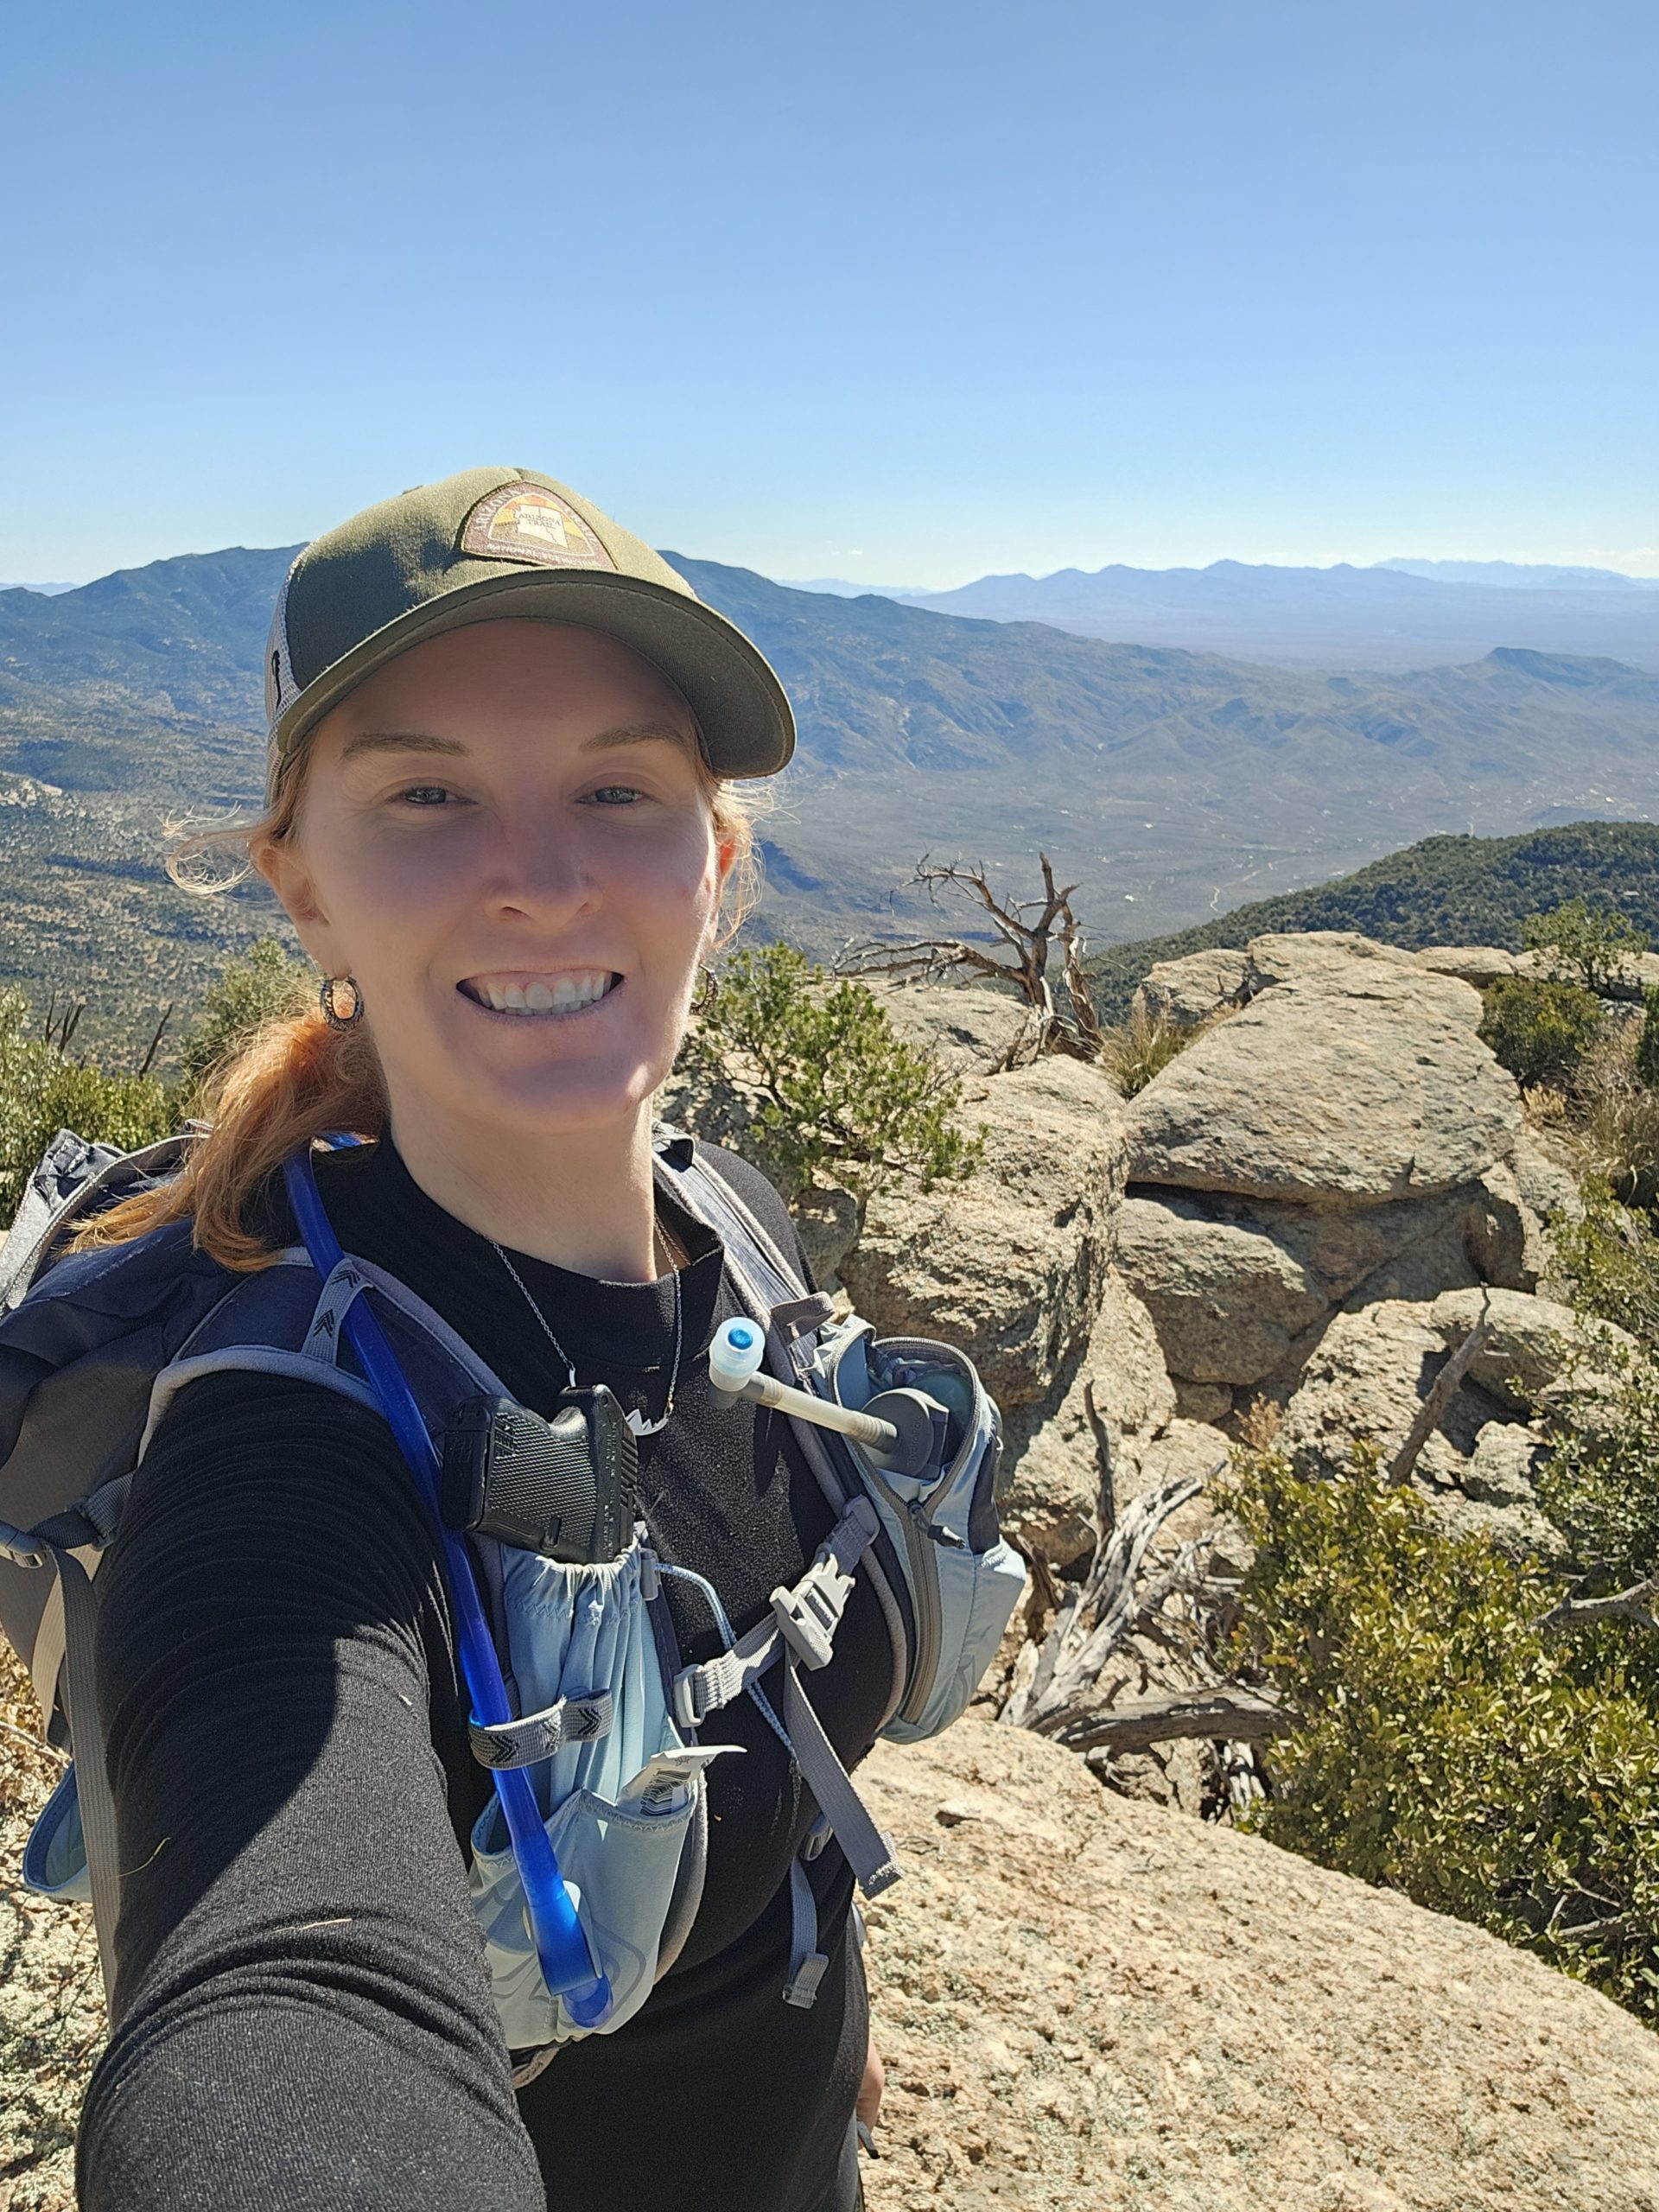 Introducing AmeriCorps Member Lillian hiking in the Gila Wilderness, AZ